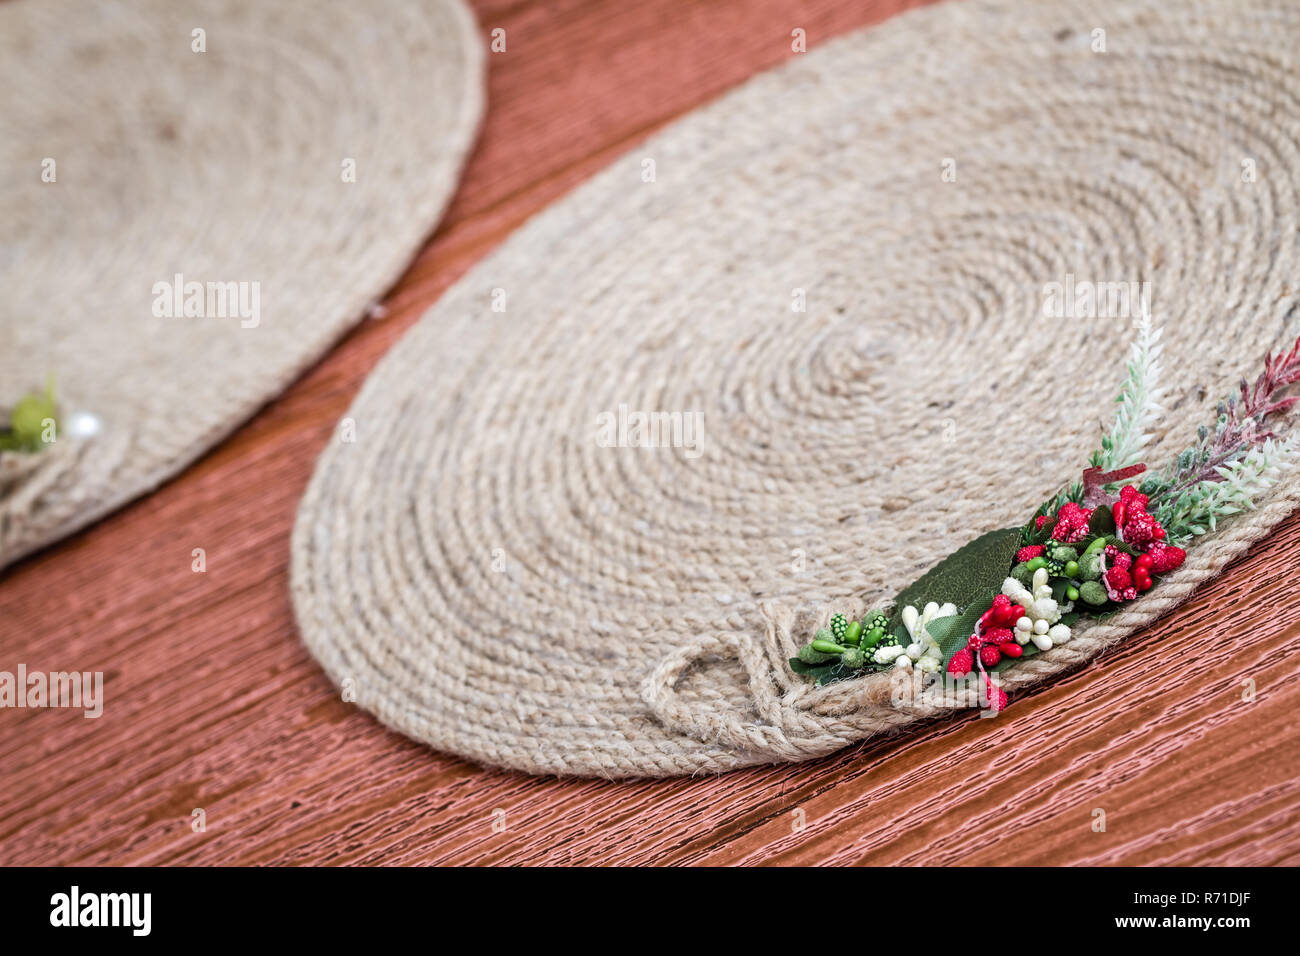 Handmade Table Mat of Jute Rope Twisted in a Spiral Form Stock Photo